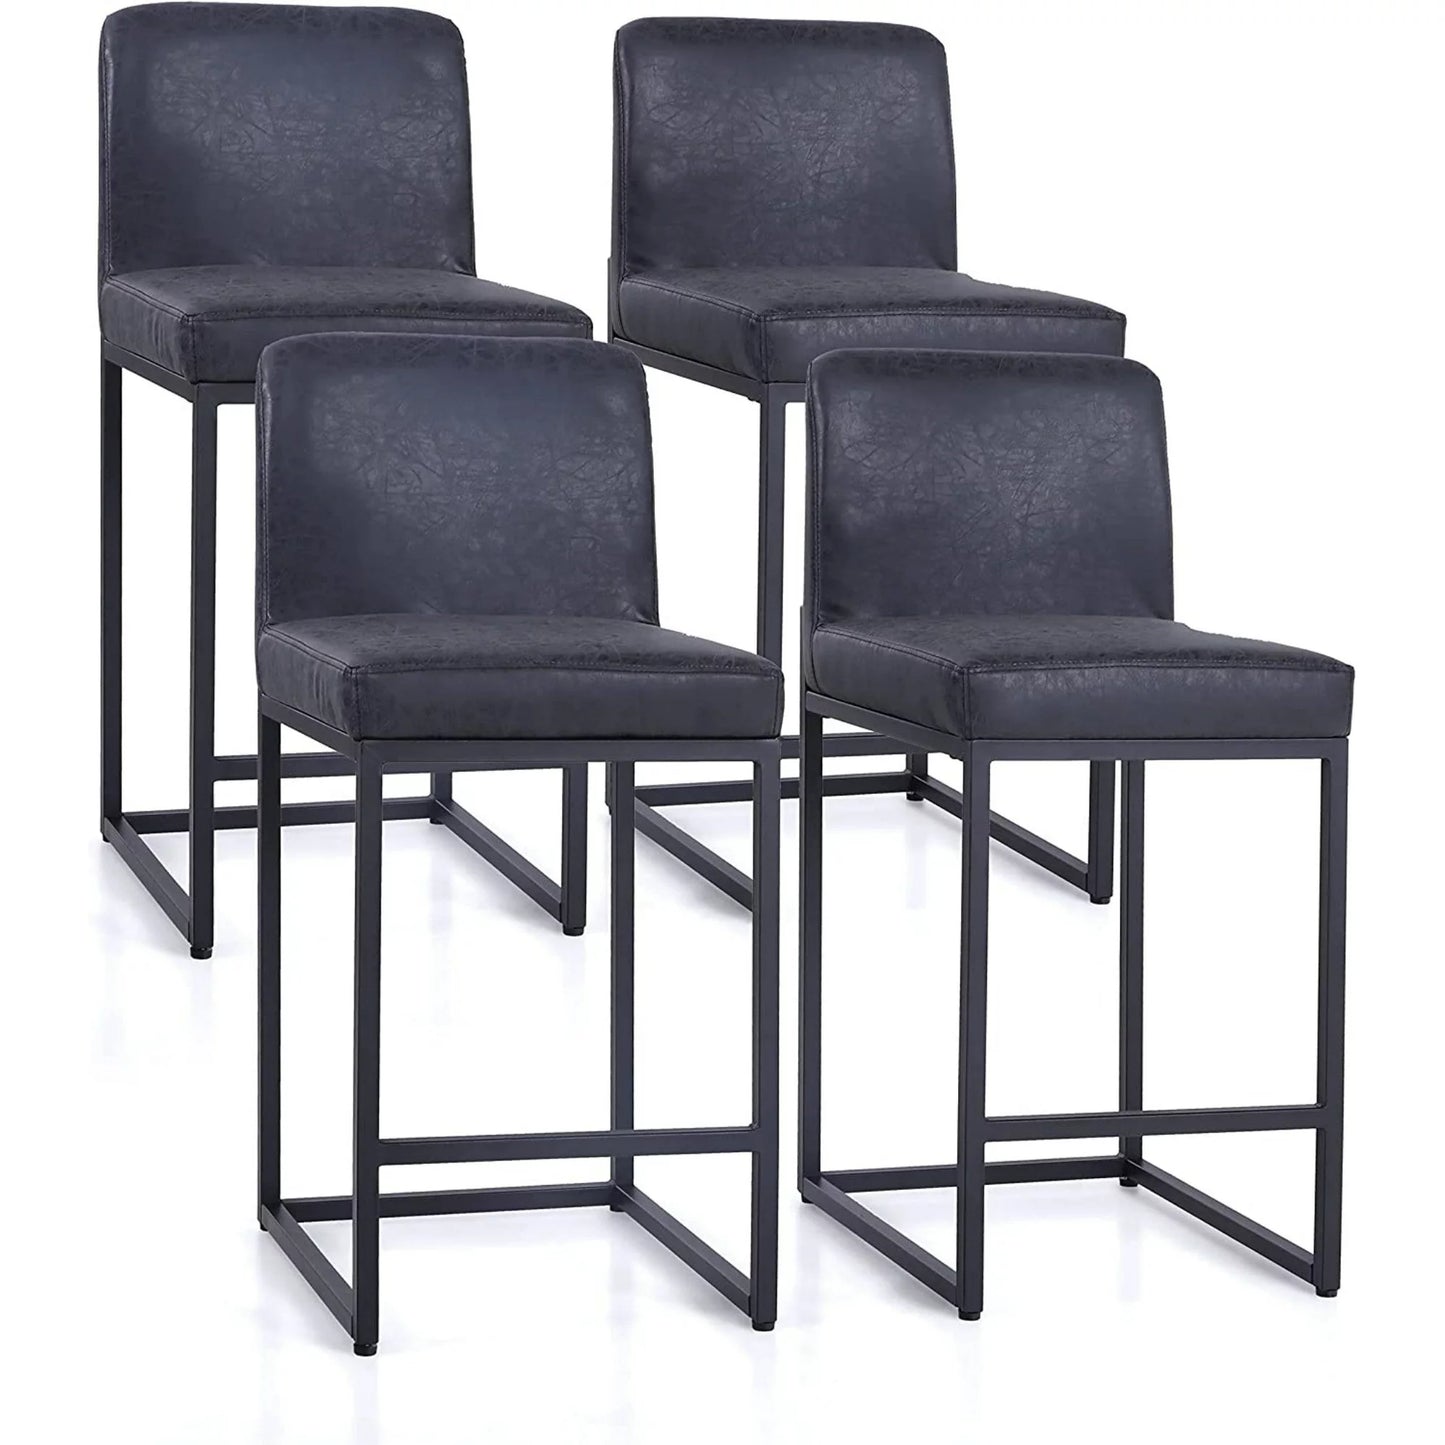 Sophia & William 24" PU Leather Counter Height Bar Stool with Backrest-Set of 4-Black